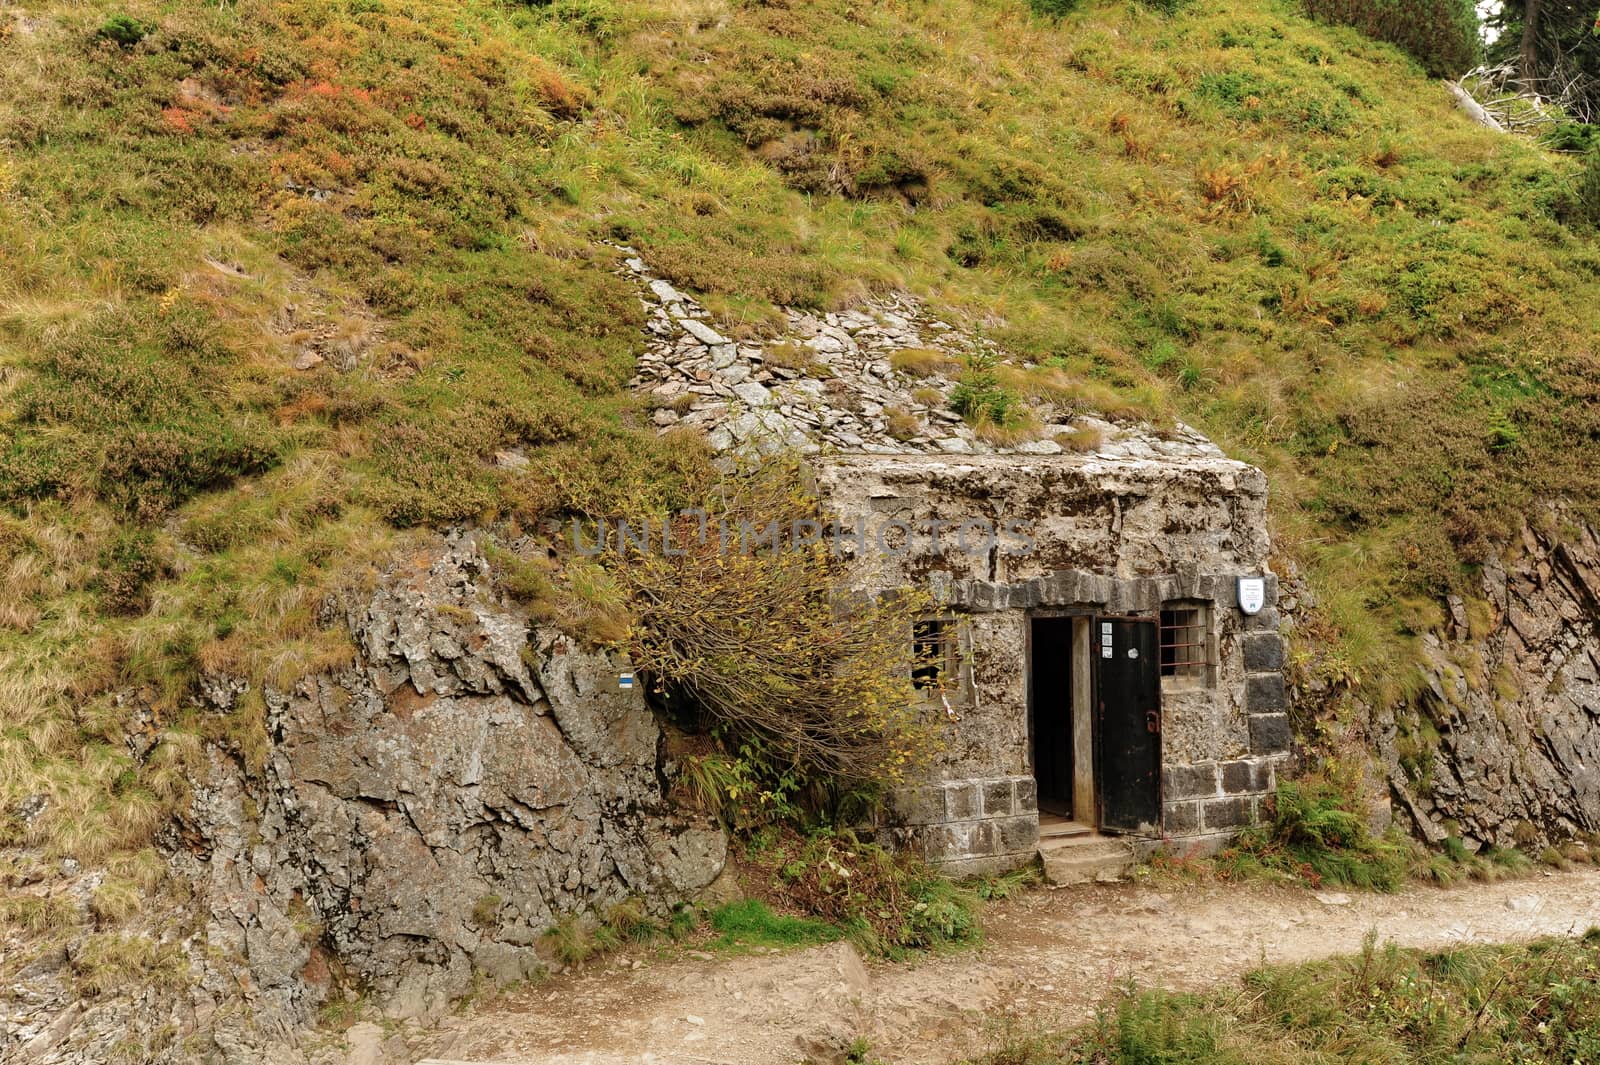 Bunker built in the rock with a small footpath